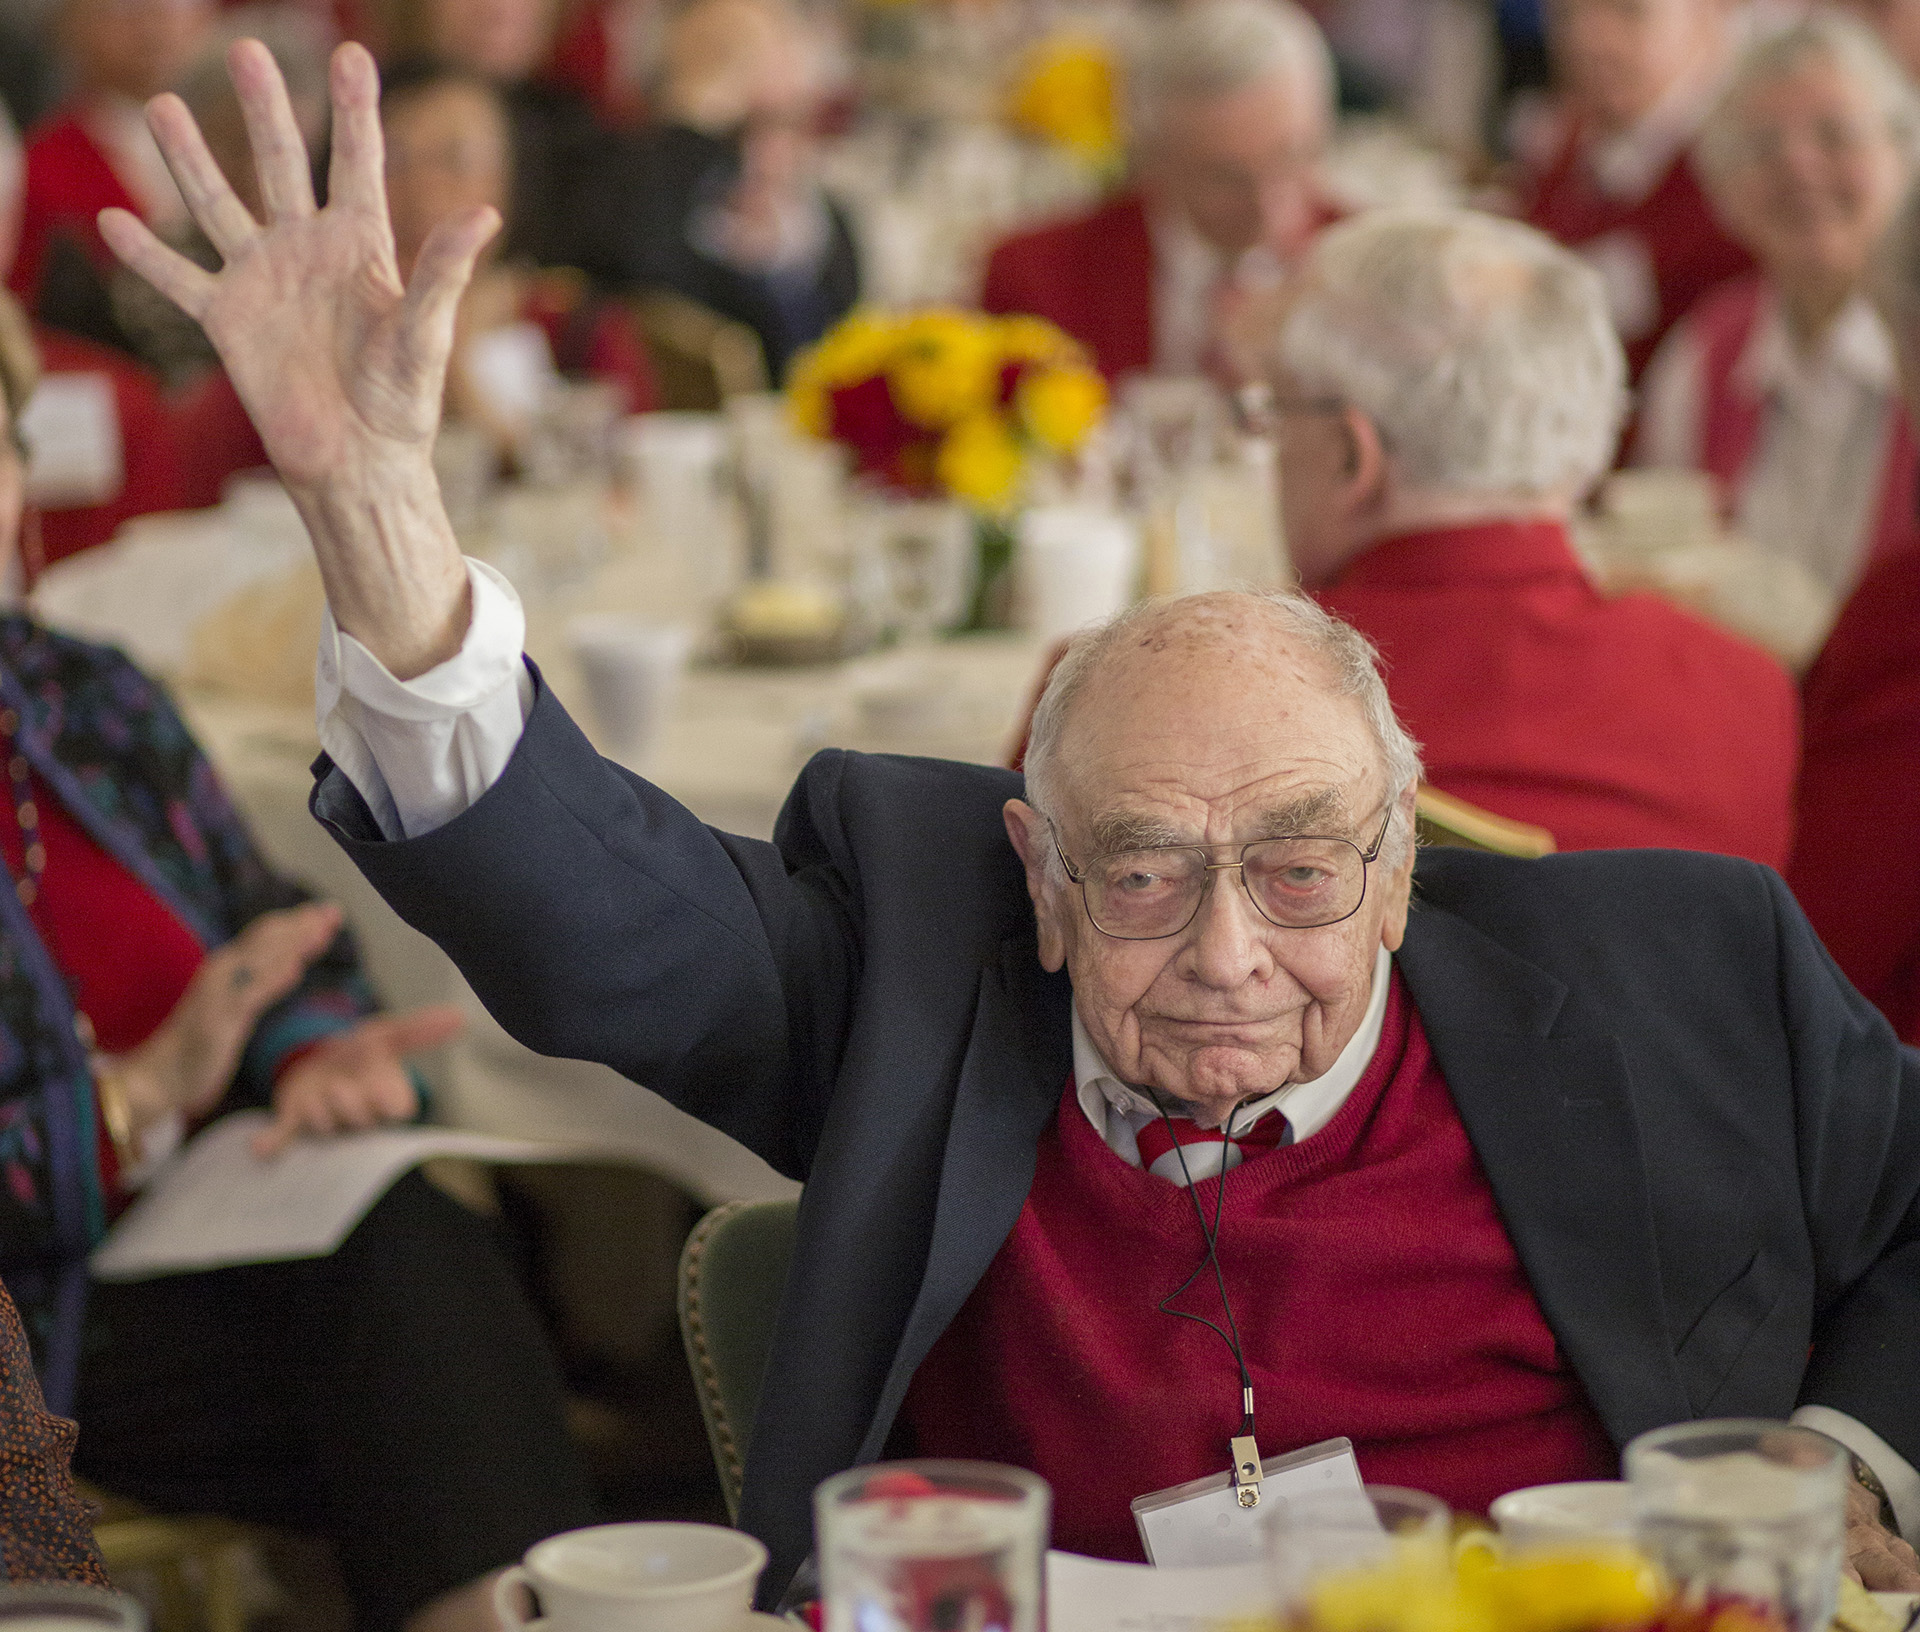 Lew Aronin ’40 is the Age Lab's member of 85+ Lifestyle Leaders.